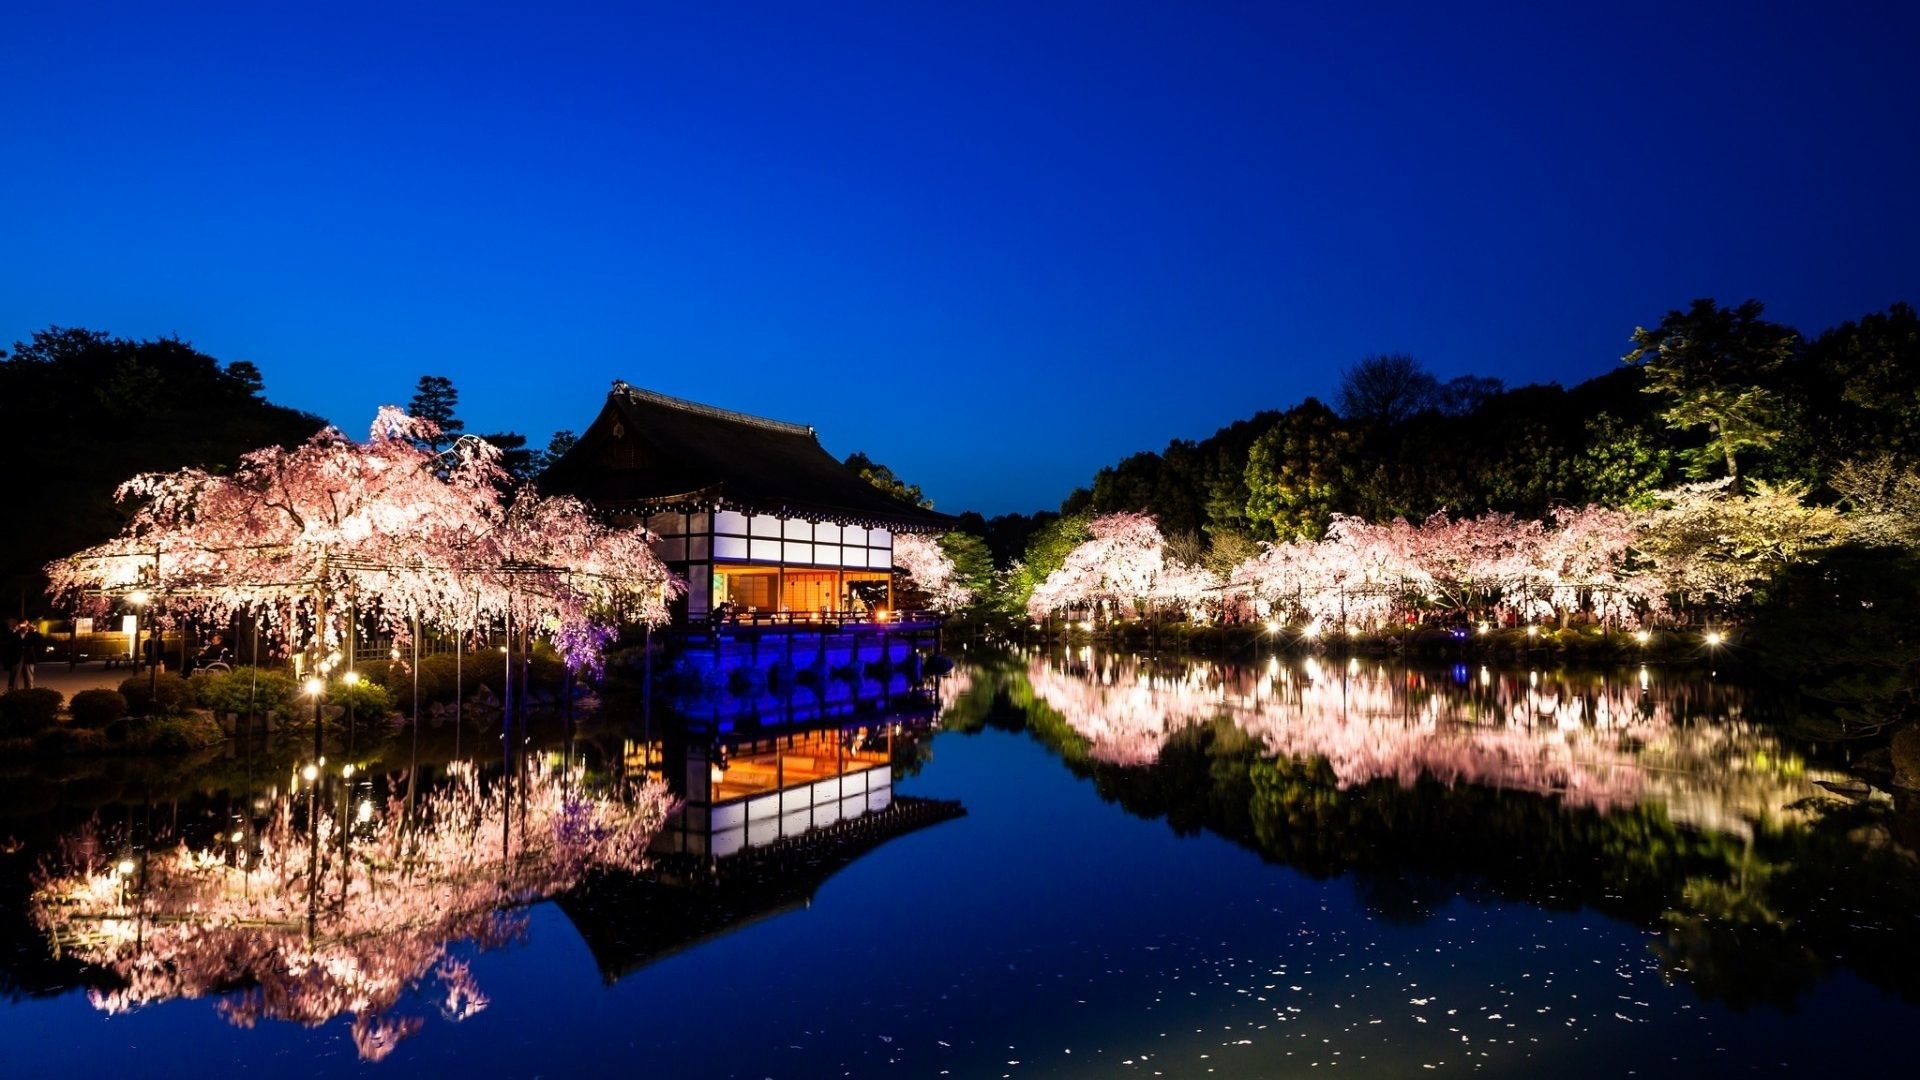 1920x1080 Religious - Heian Shrine Kyoto Water Night Wallpapers for HD 16:9 High  Definition 1080p